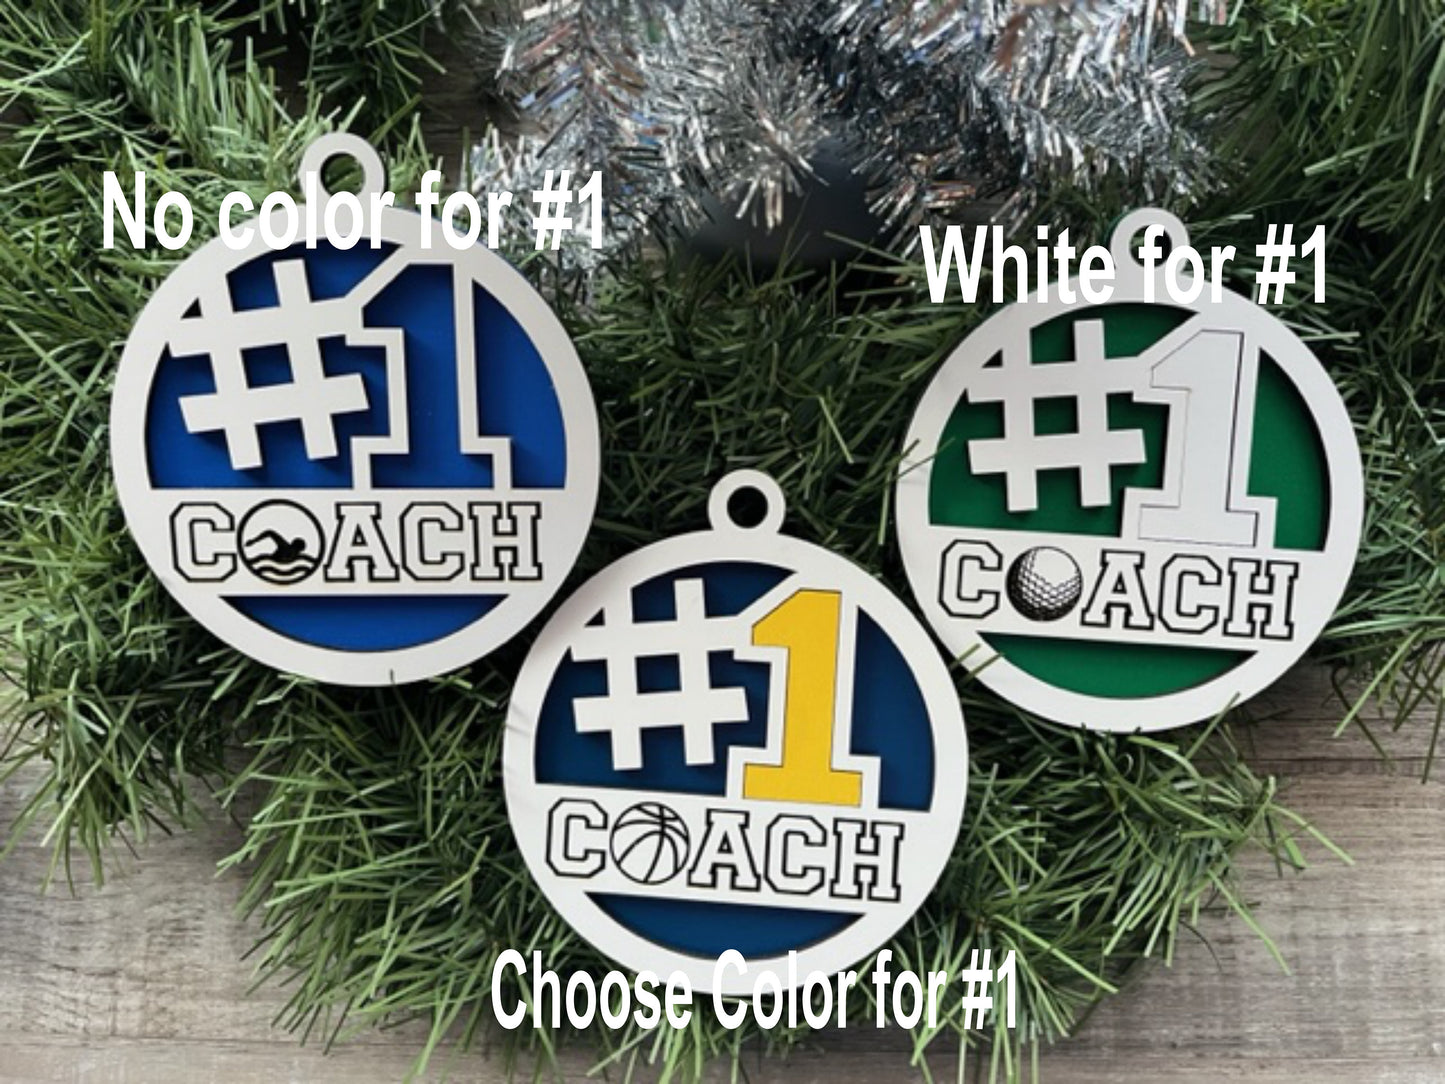 Cheer Coach Ornament/ #1 Coach Ornament/ Cheerleader/ Christmas Ornaments/ Sports Ornaments/ Choose Colors/ Coach Gift/ Gift for Coach